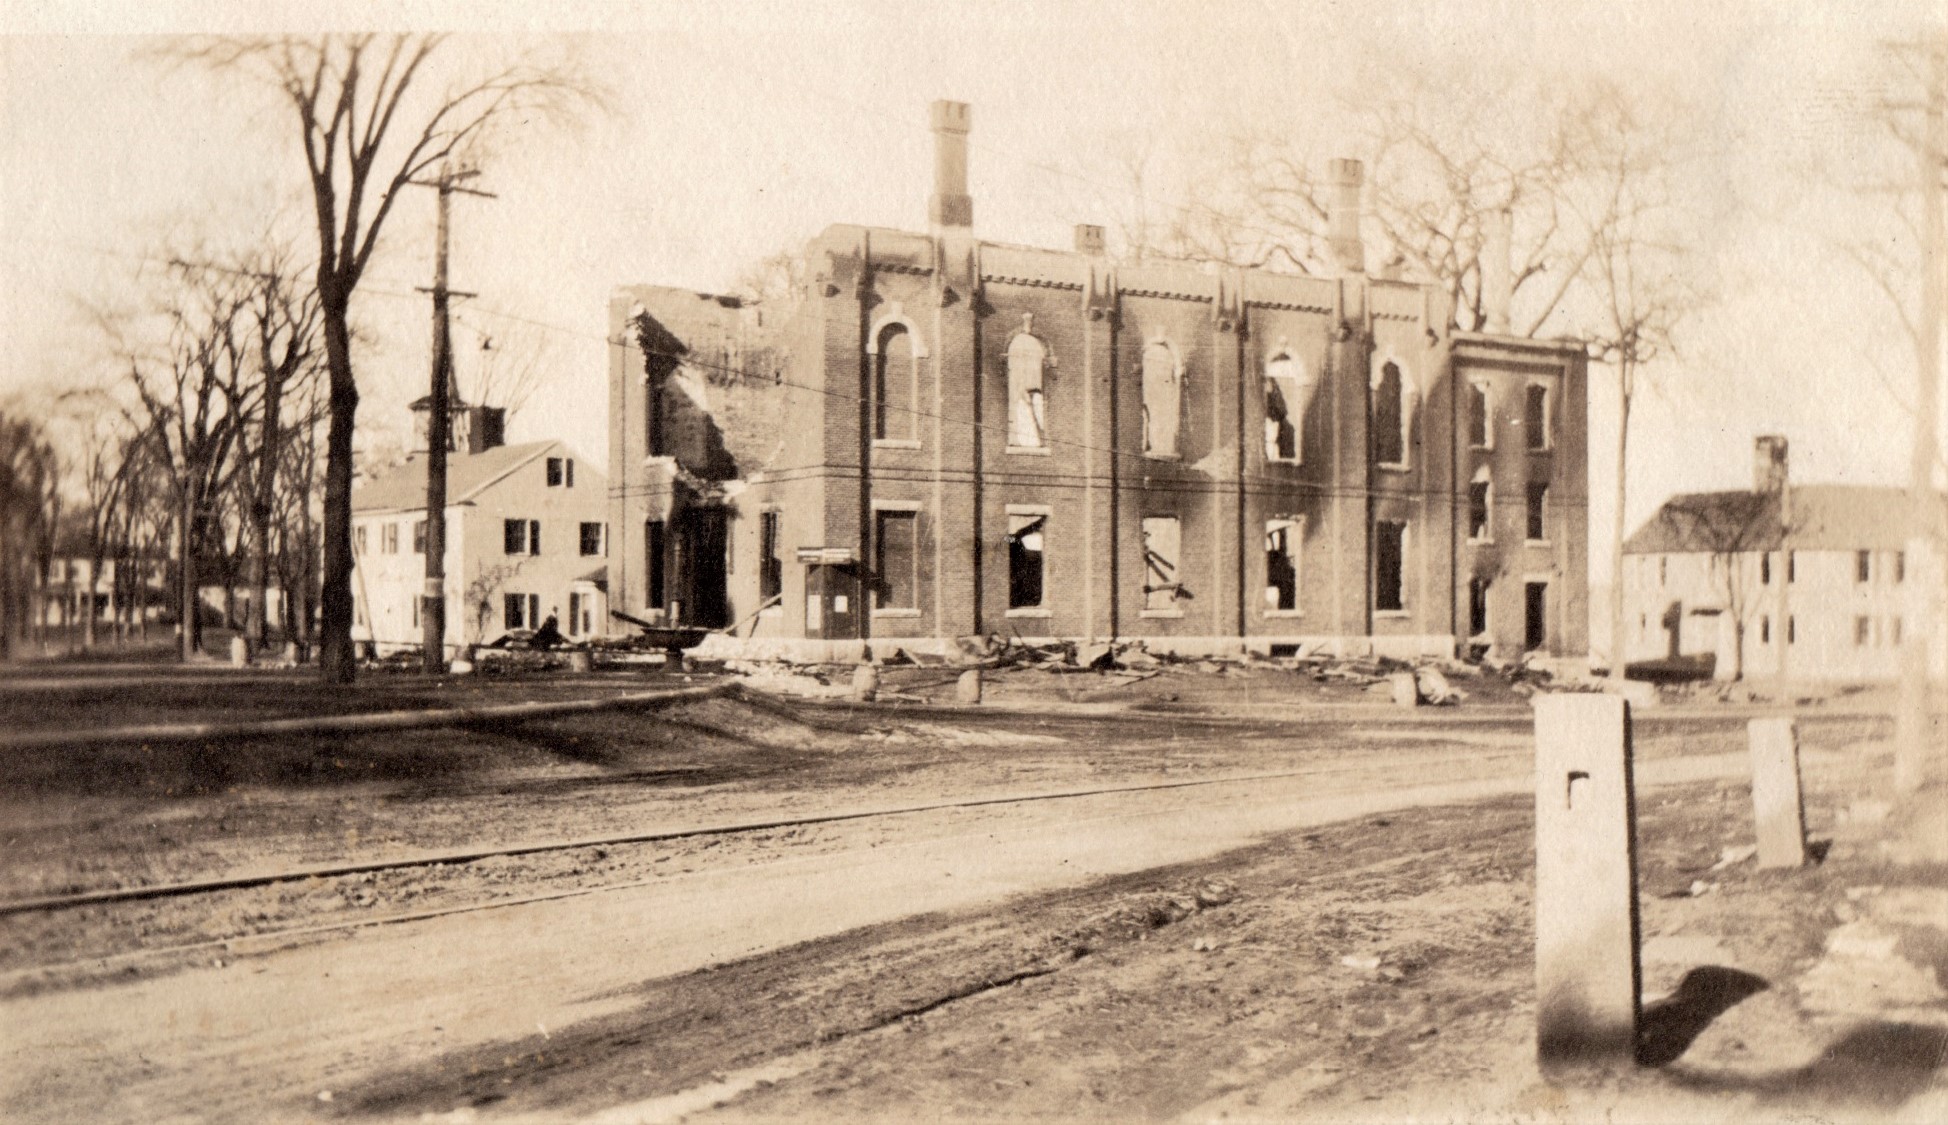 The Kennebunk Town Hall was destroyed by a fire on March 19th 1920.